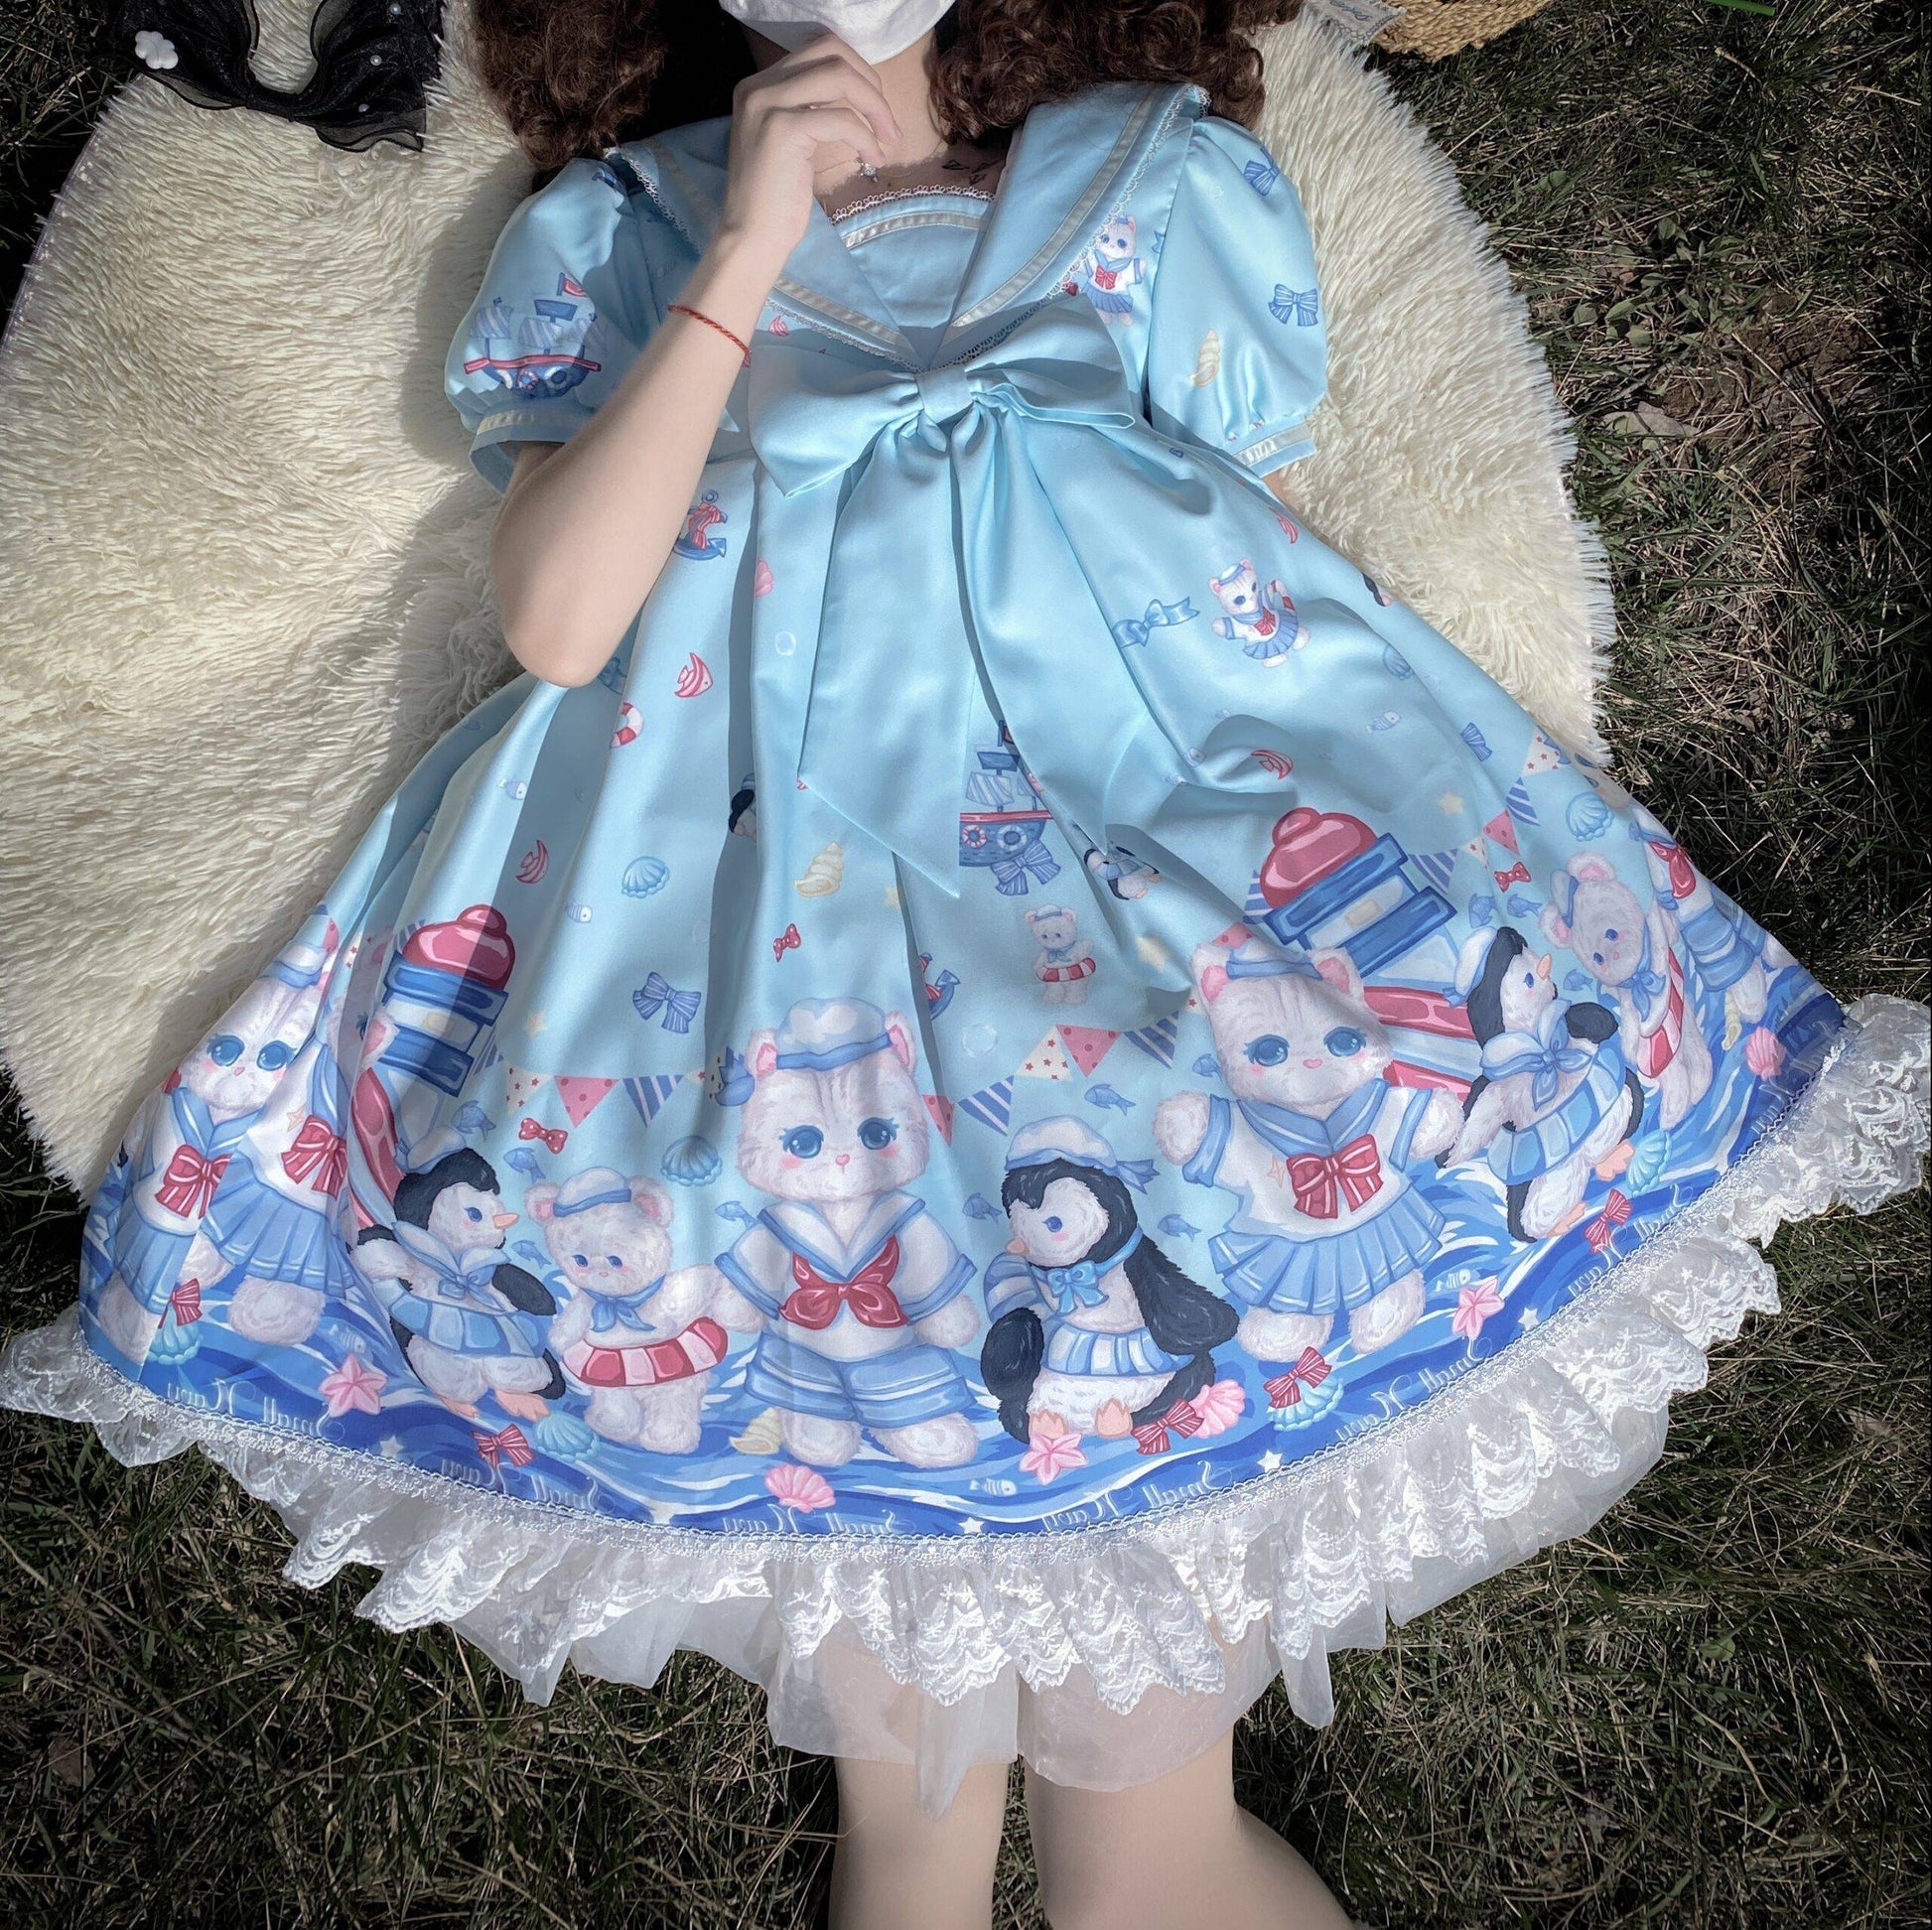 Lolita Dress With Cute Cat and Penguin Print - Kawaii Stop - All Dresses, Bow, Cat, Collar, Cute, Dress, Dresses, Girls, Japanese, Kawaii, Lolita, Lolita Dresses, Navy, Penguin, Preppy, Print, Sailor, Style, Sweet, Vintage, Women's Clothing &amp; Accessories